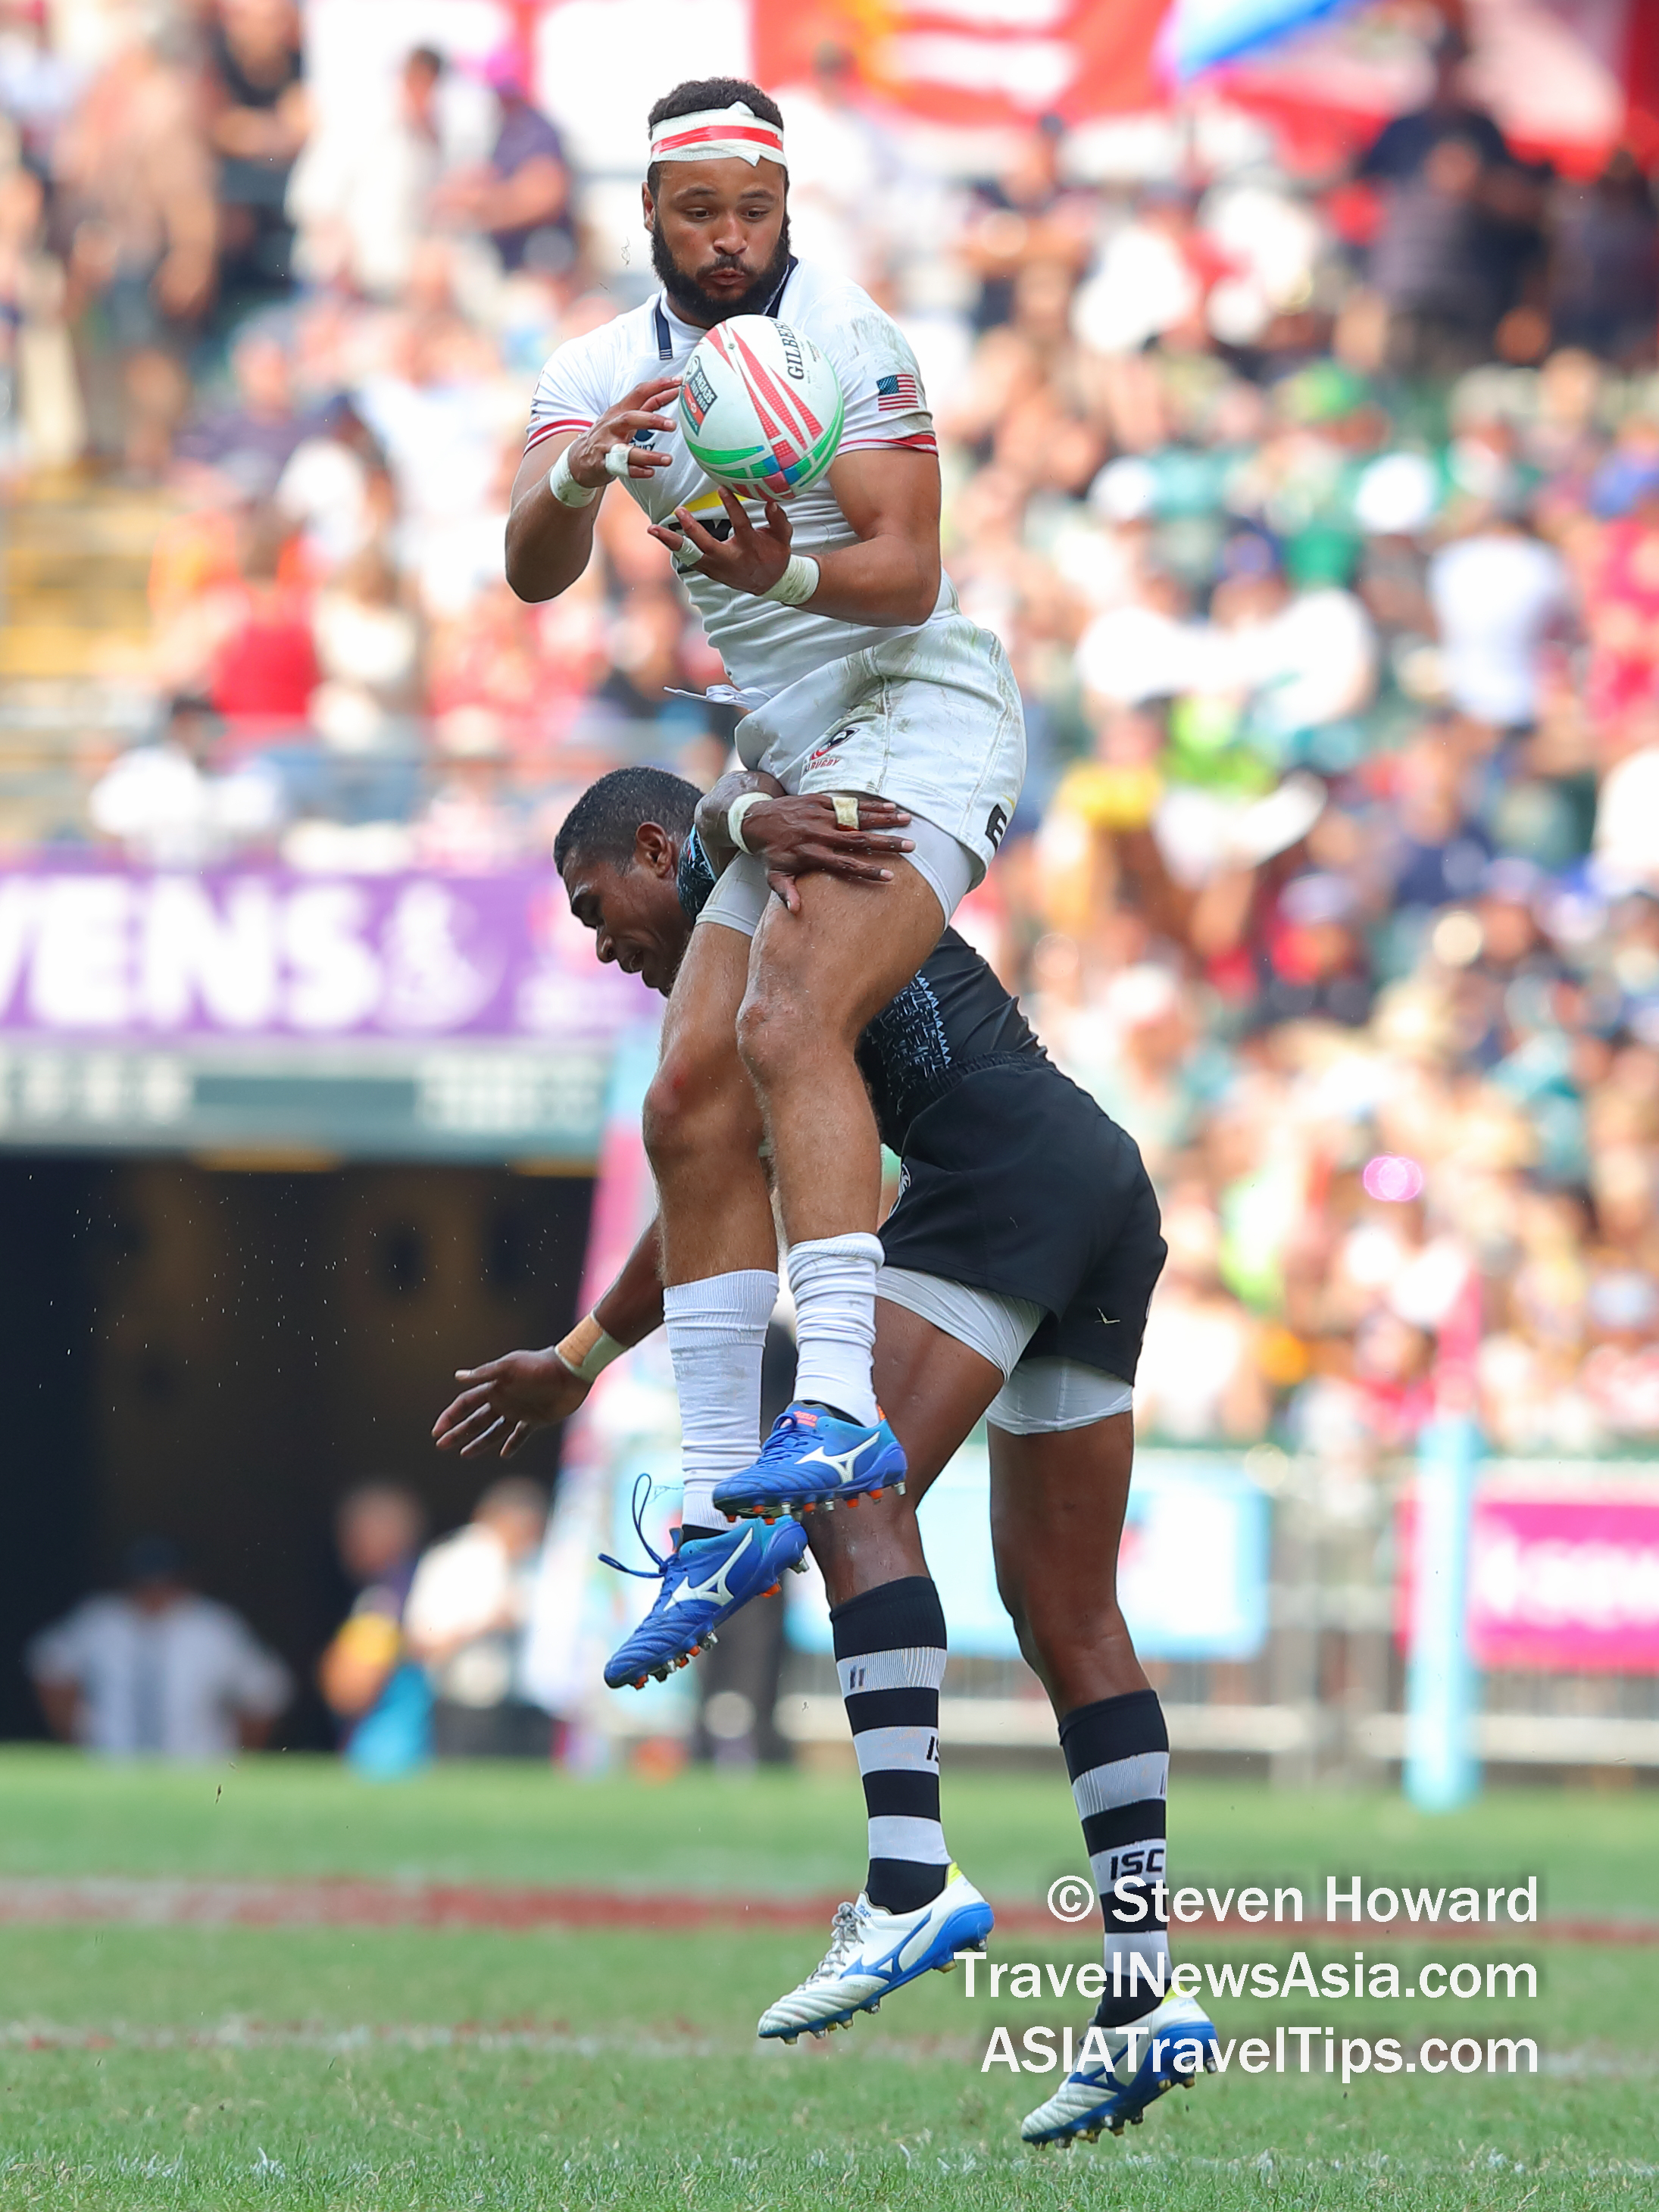 Team USA in action against Fiji at the Cathay Pacific / HSBC Hong Kong Sevens 2019. Picture by Steven Howard of TravelNewsAsia.com Click to enlarge.